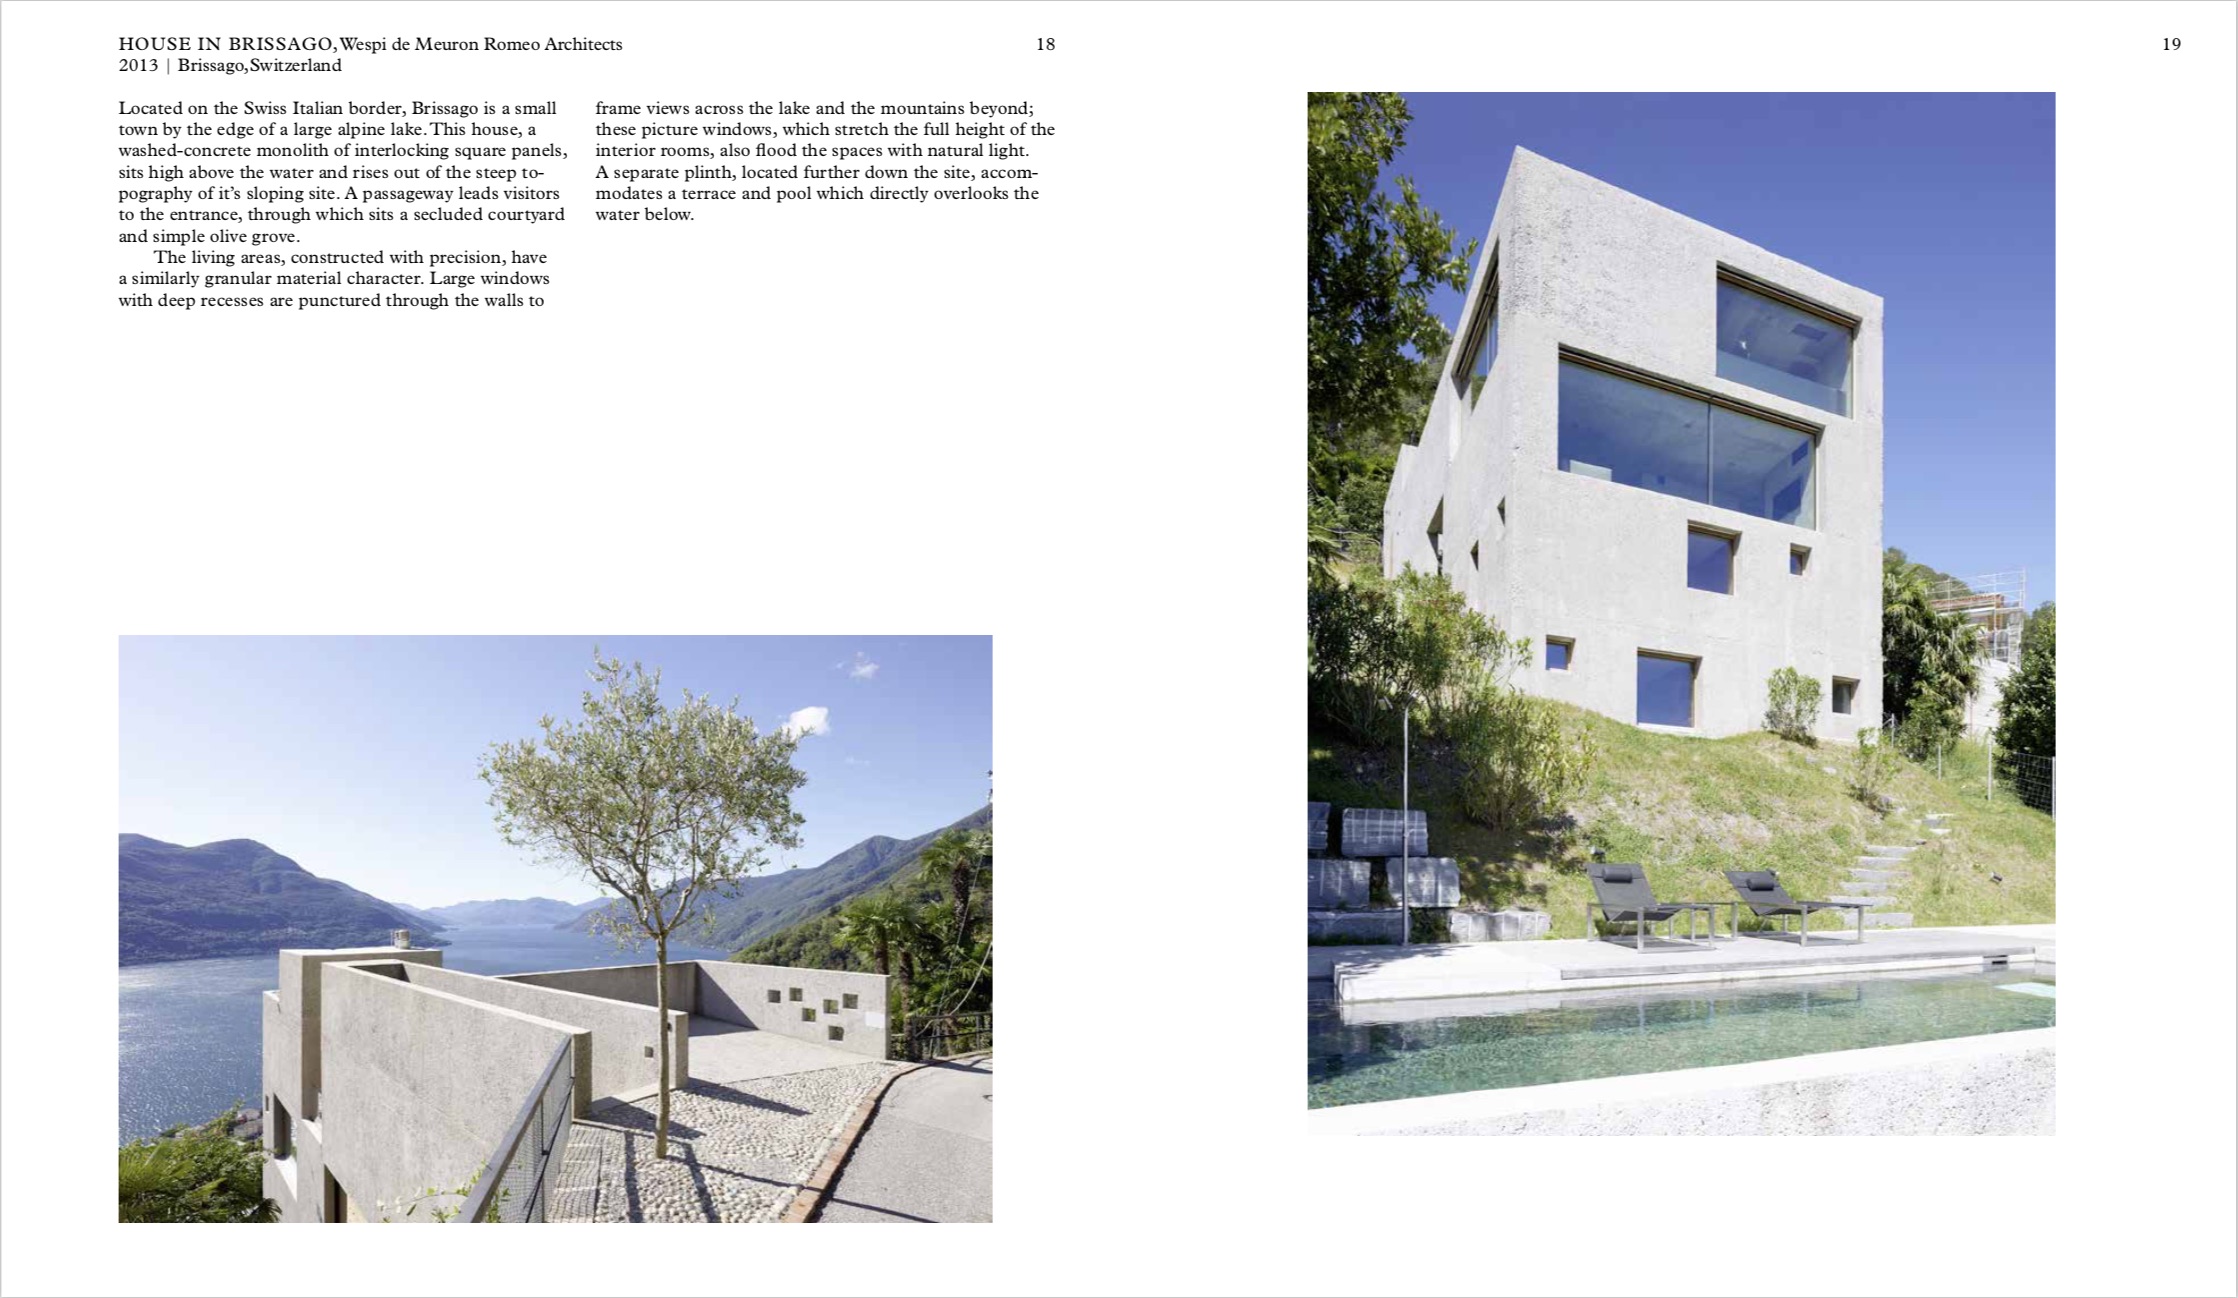 By Phaidon Editors from Living on Water: Contemporary Houses Framed by Water copyright Phaidon 2018